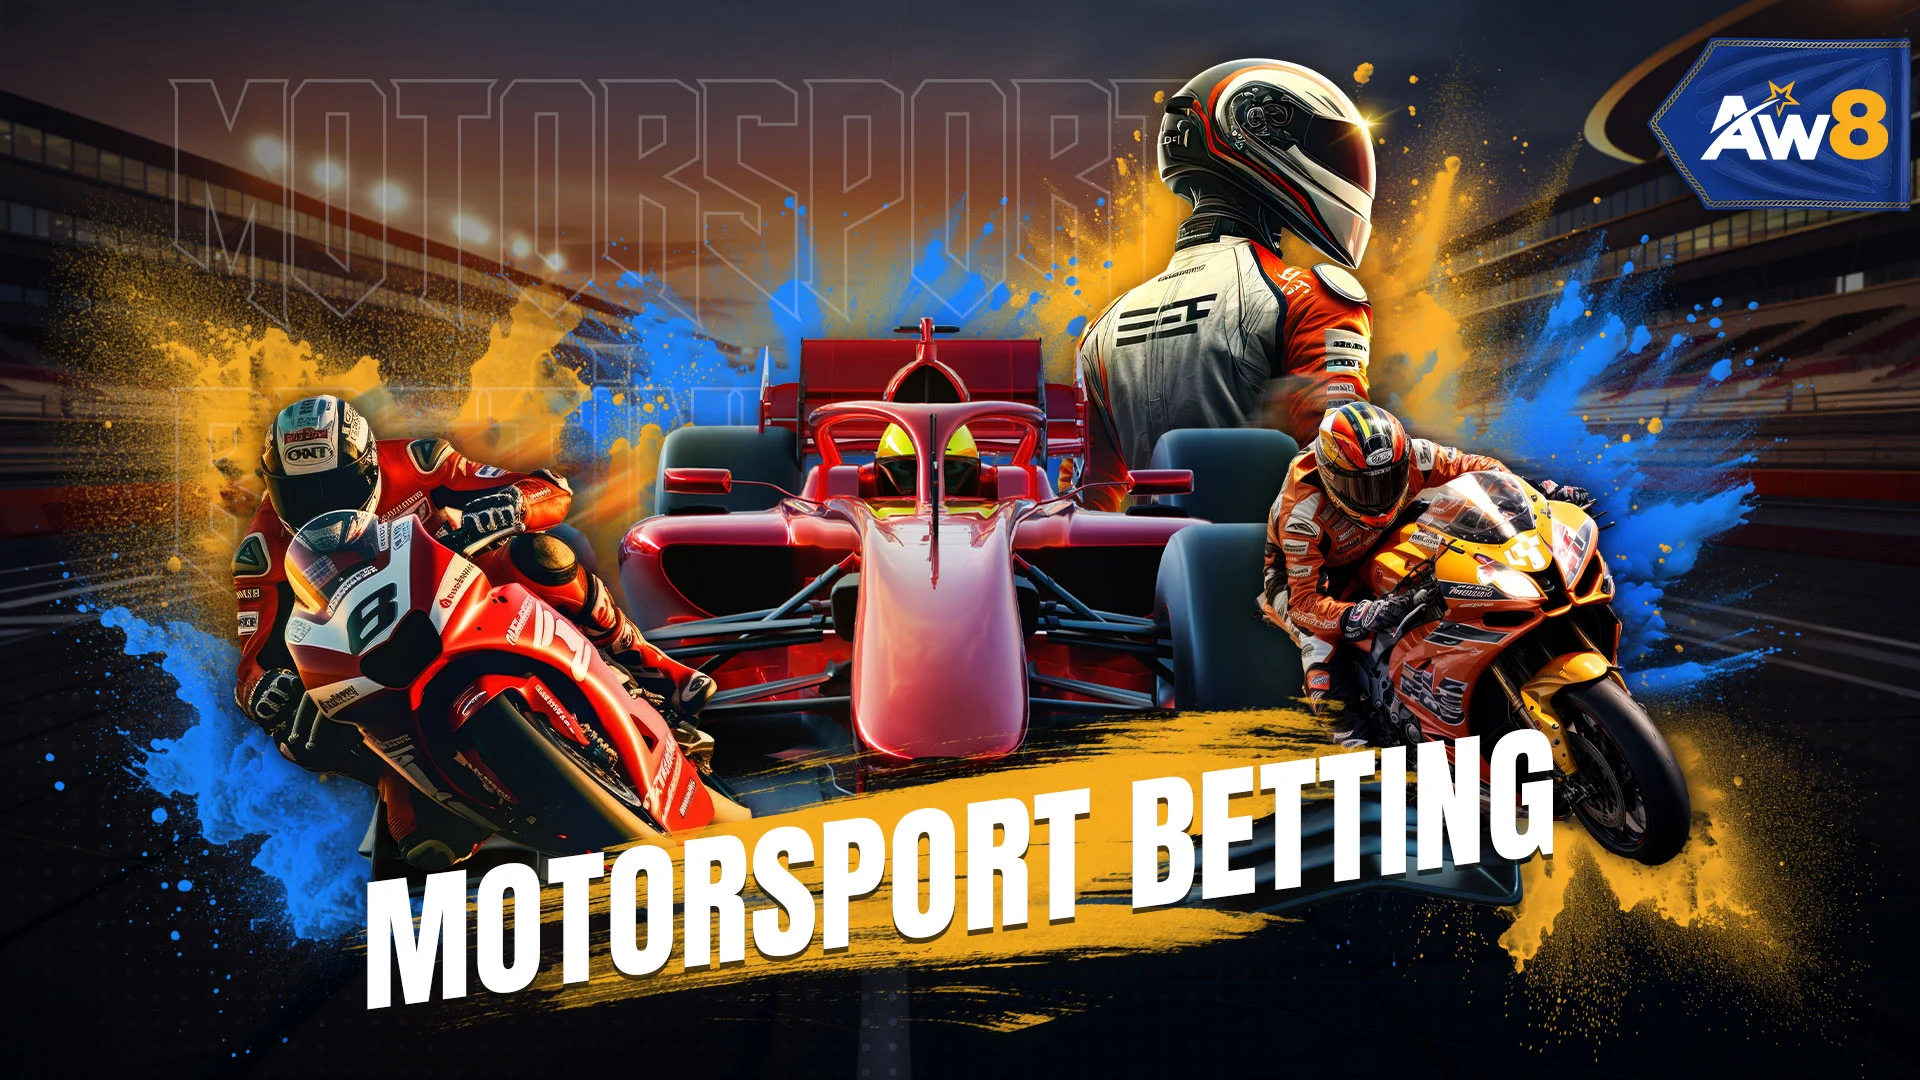 Motorsports betting in Malaysia by AW8